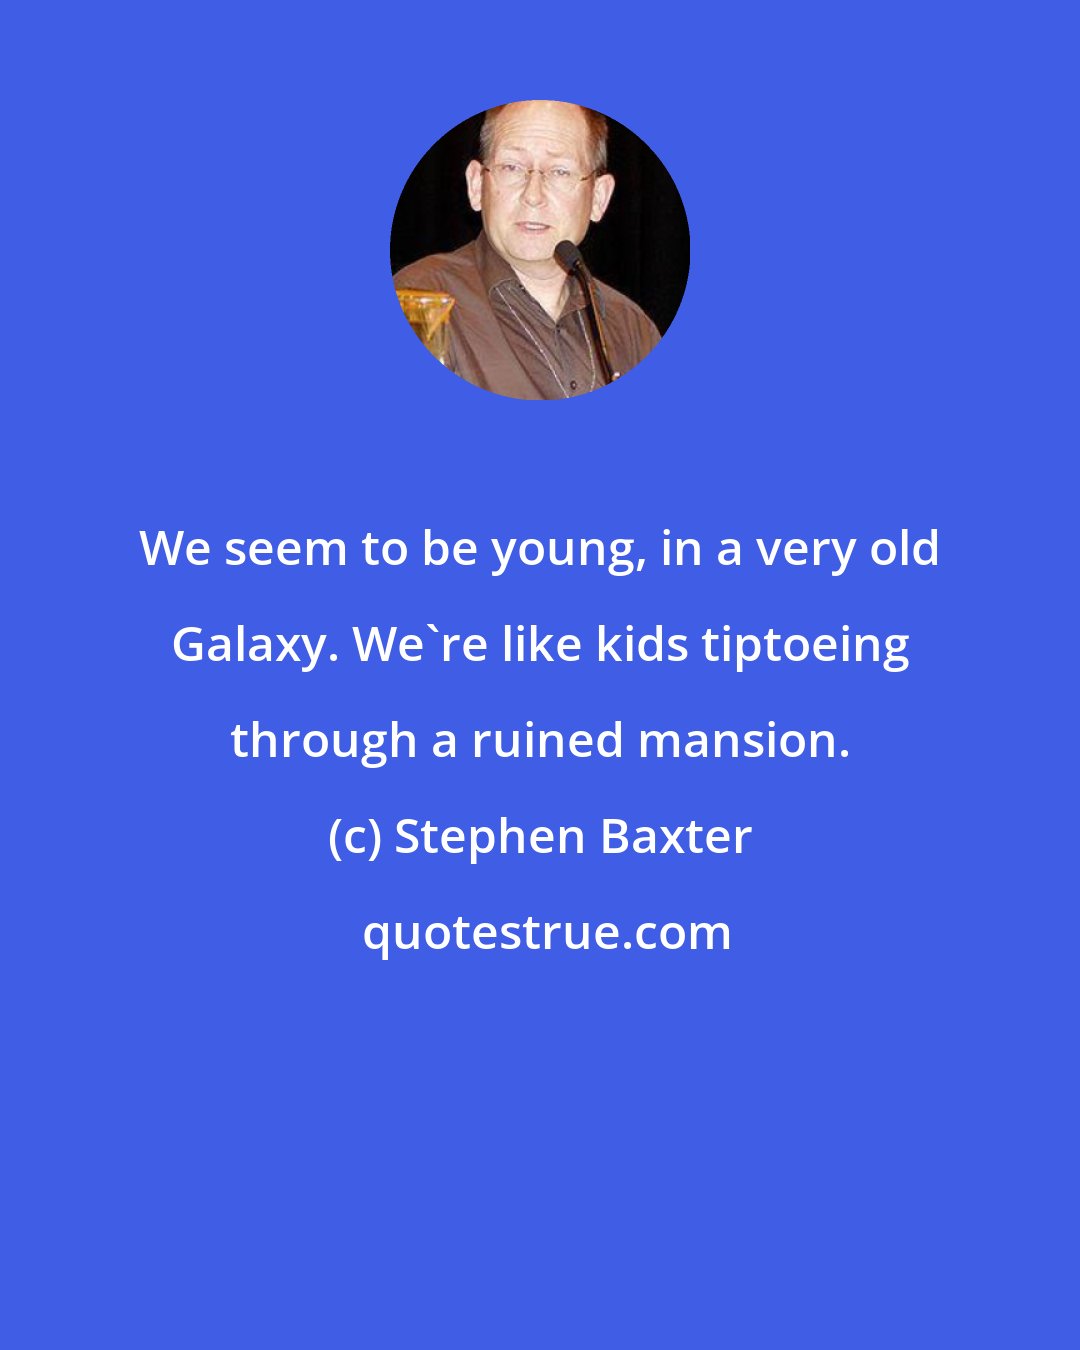 Stephen Baxter: We seem to be young, in a very old Galaxy. We're like kids tiptoeing through a ruined mansion.